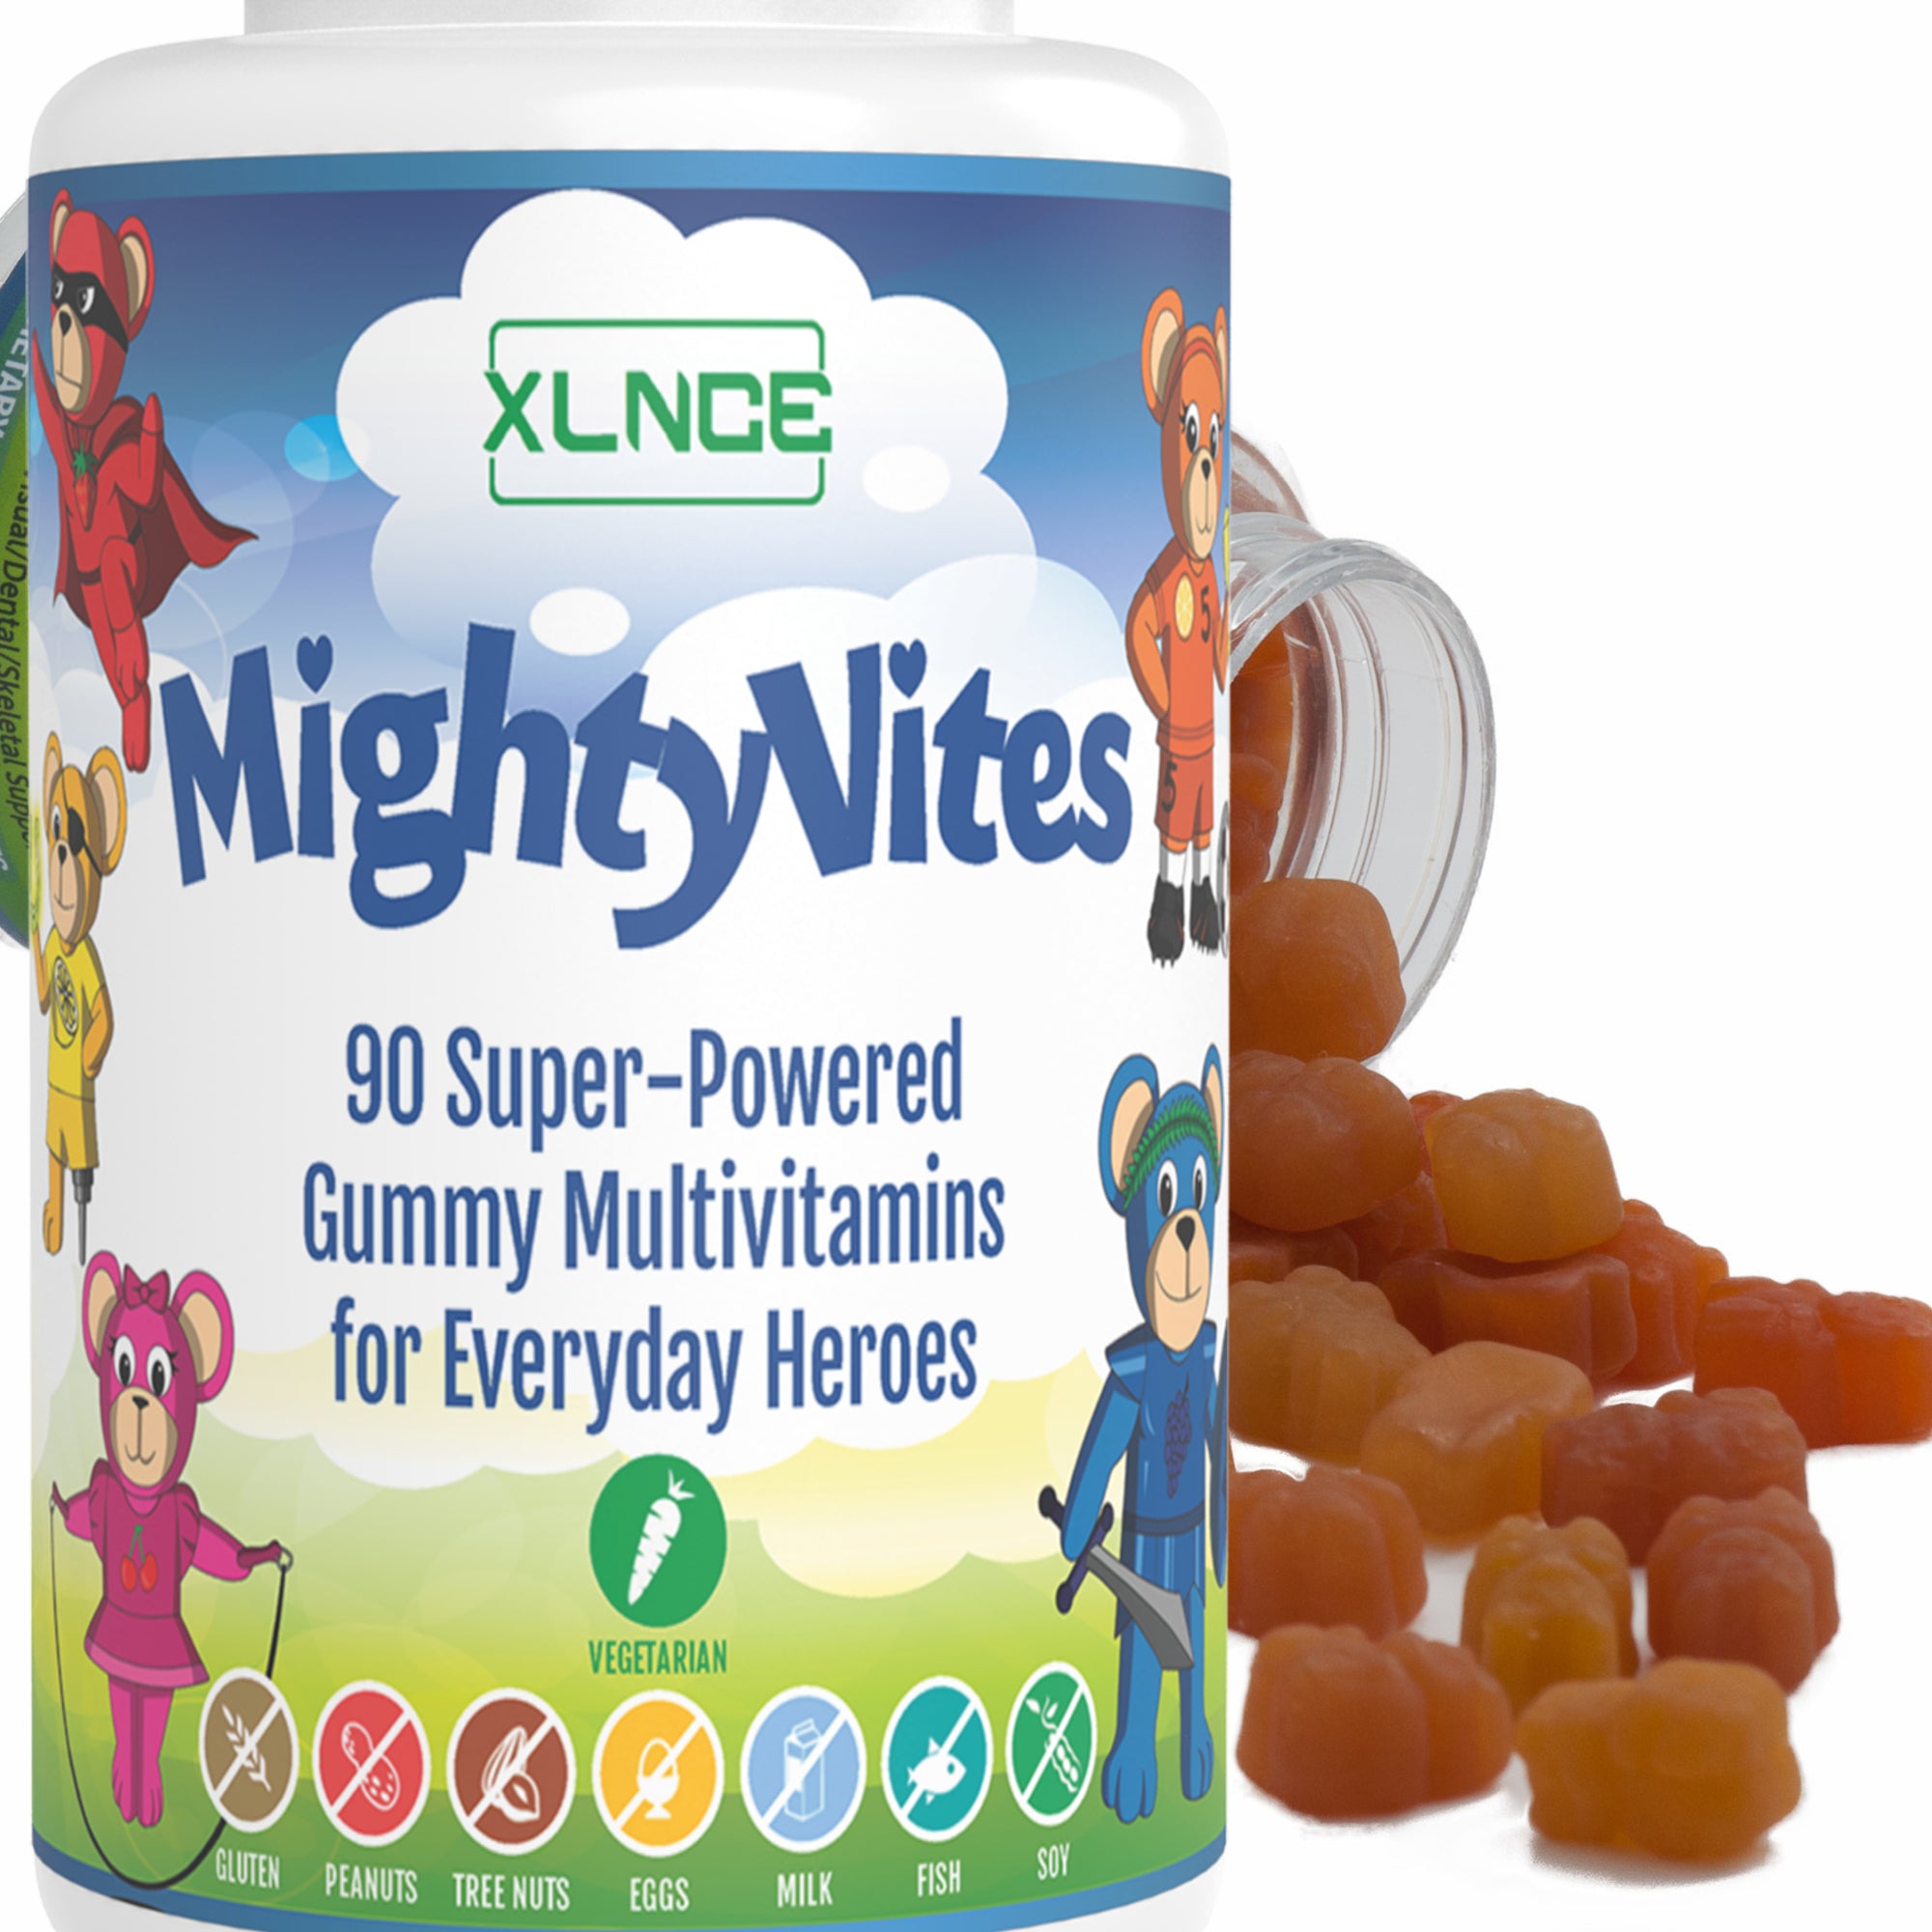 MightyVites - Super Powered Gummy Bears for Your Every Day Heroes